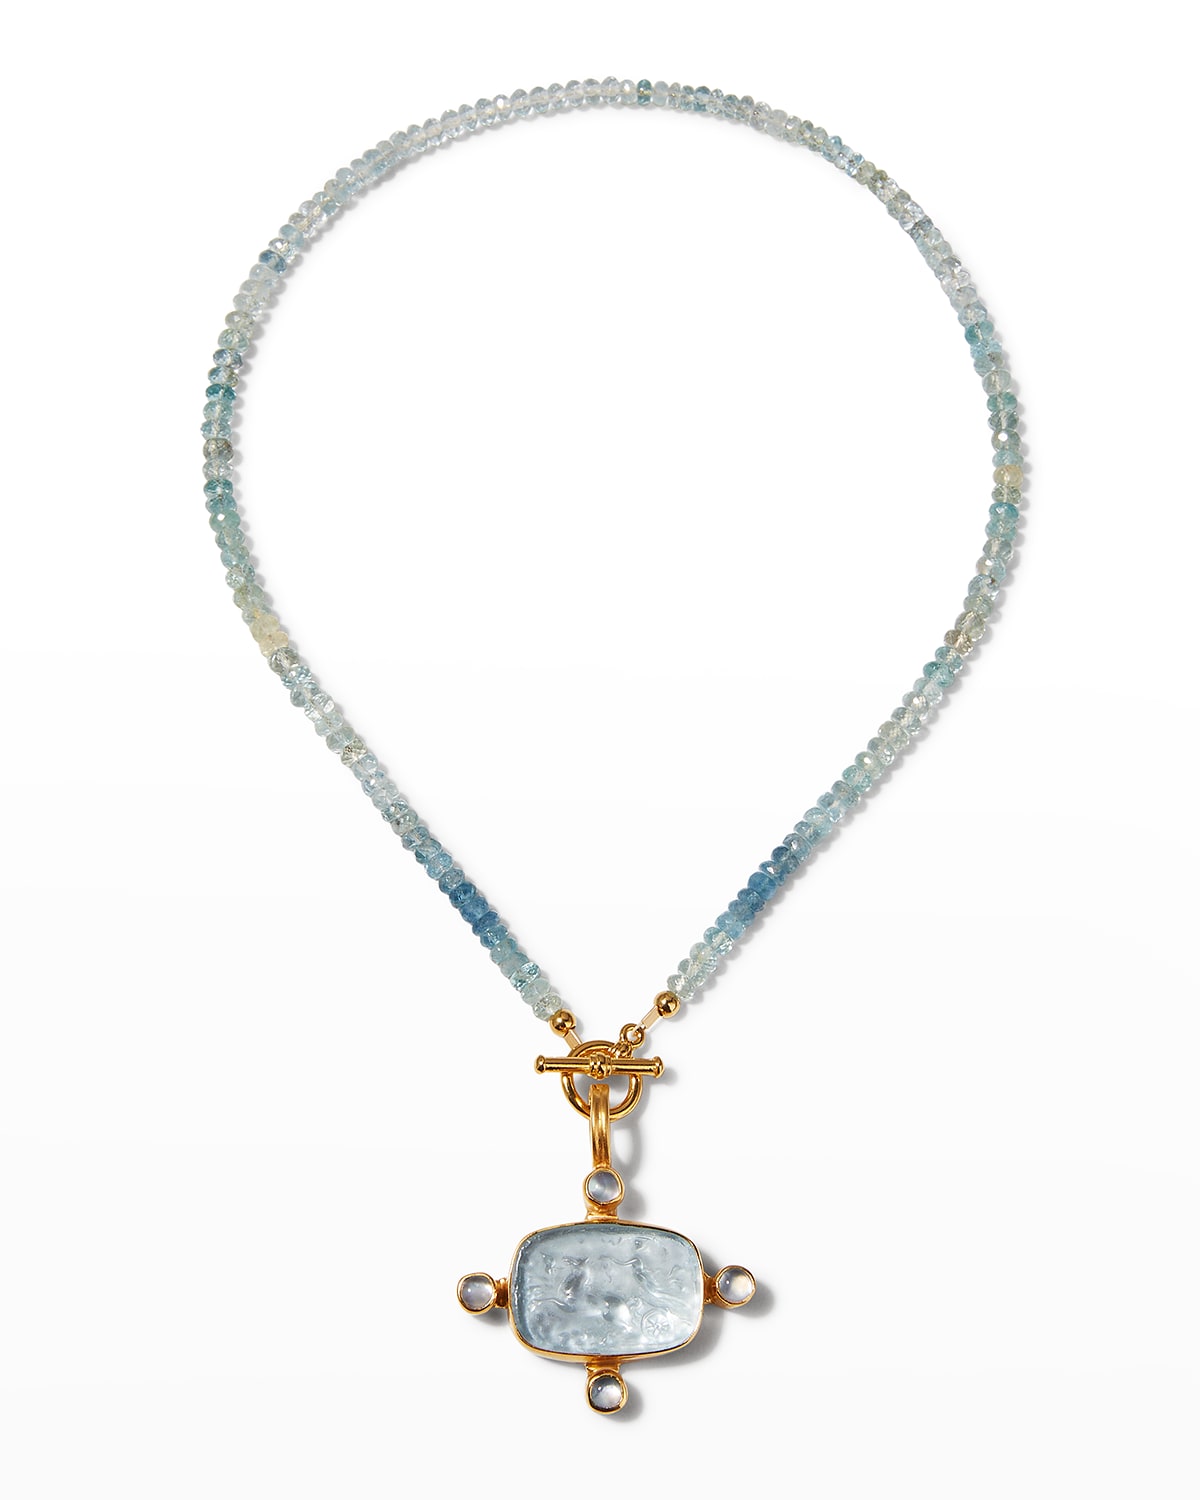 Dina Mackney Aquamarine And Italian Glass Intaglio Enhancer With Necklace In Gold